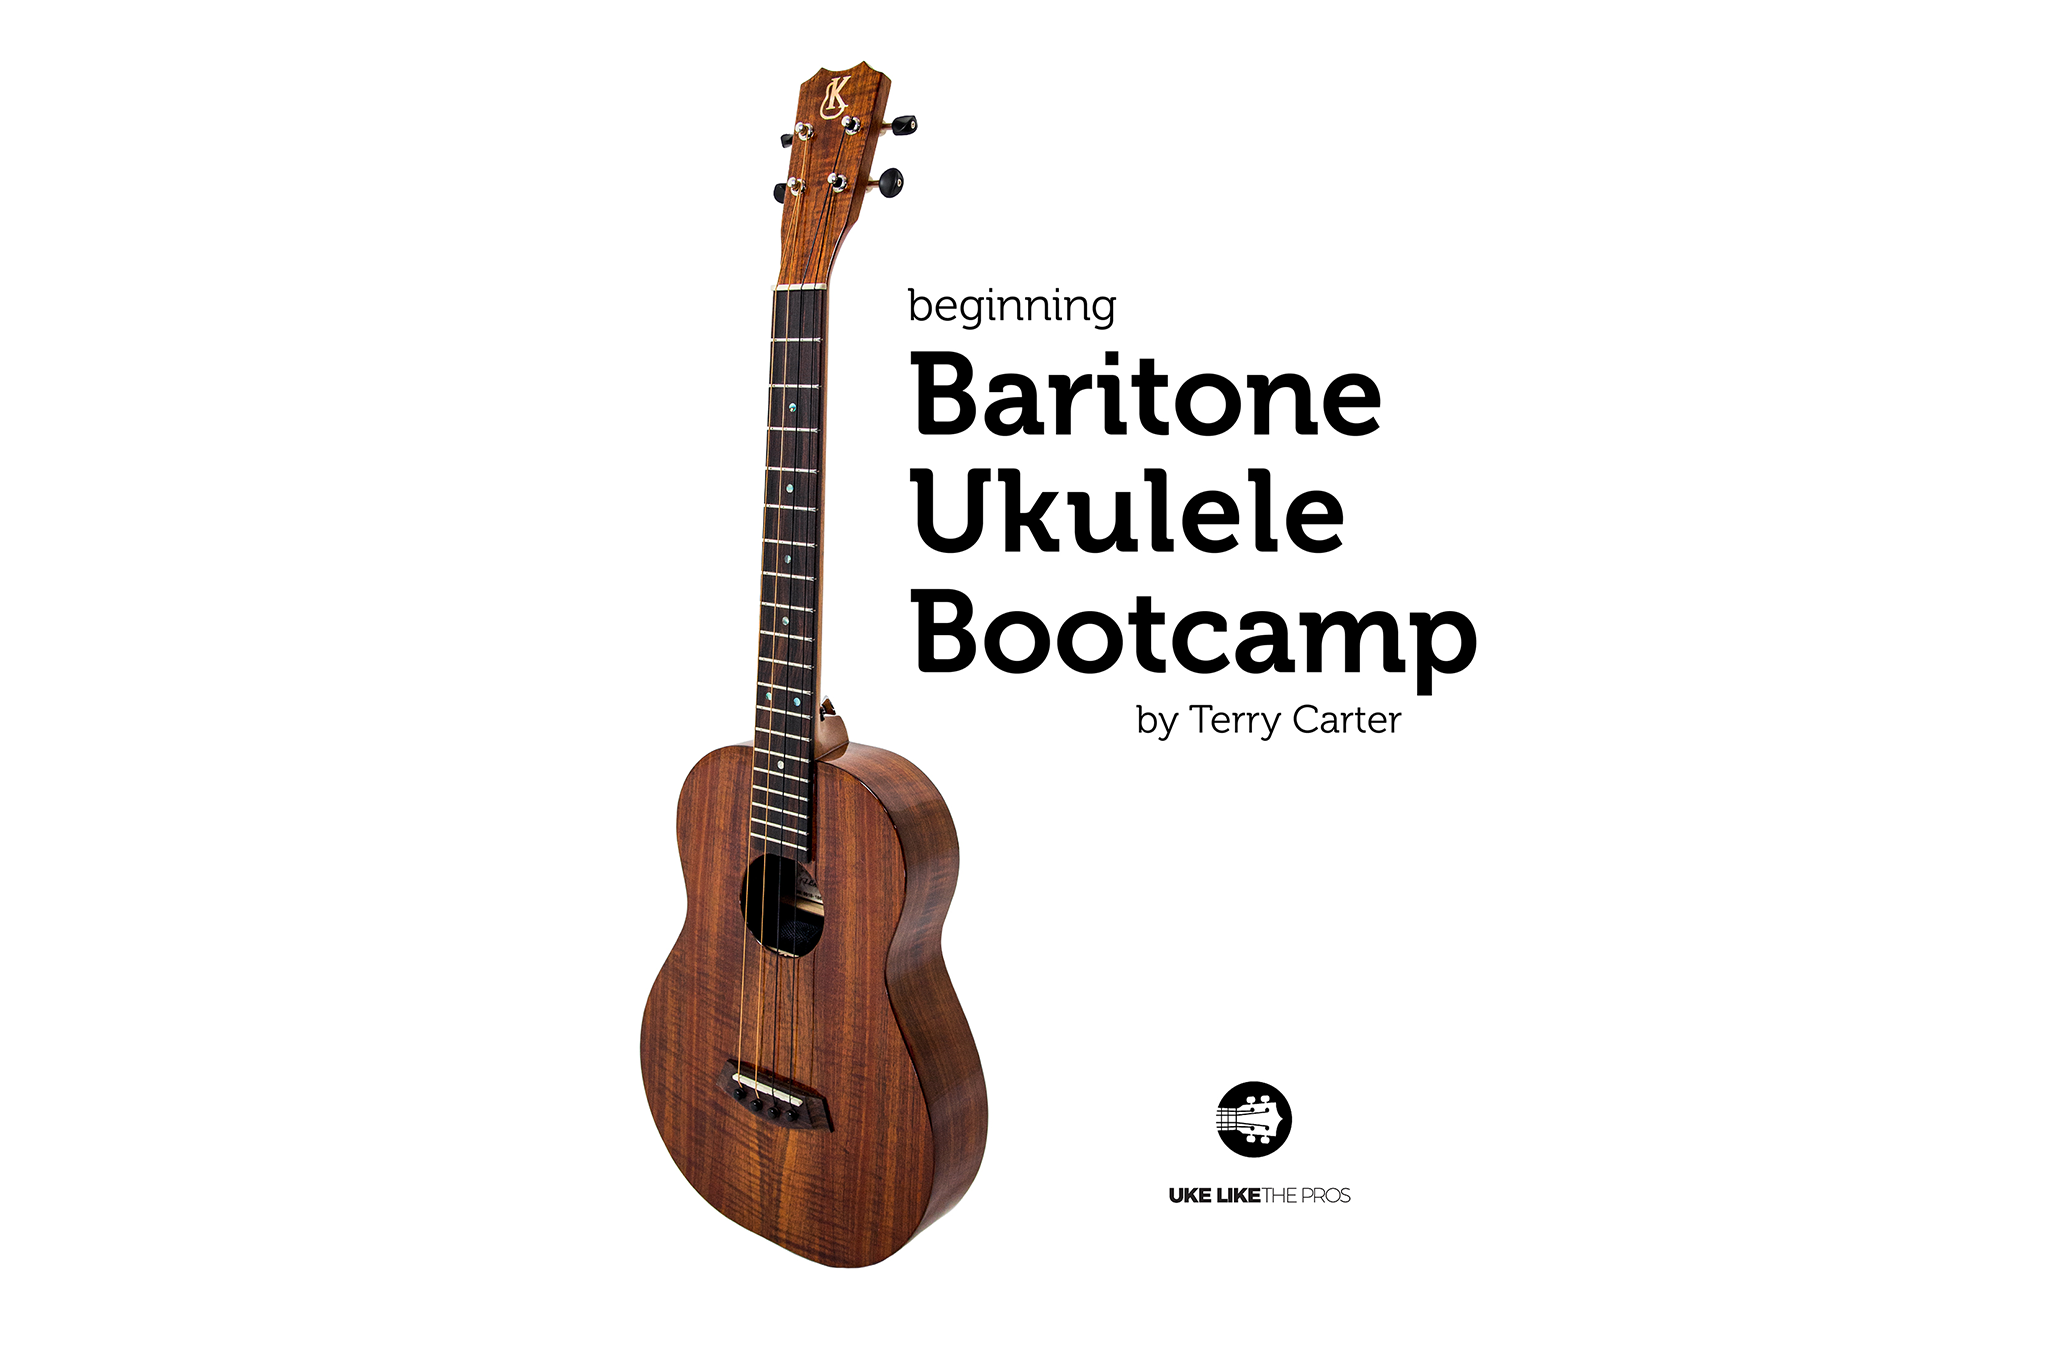 The Daily Ukulele Leap Year - Terry Carter Music Store